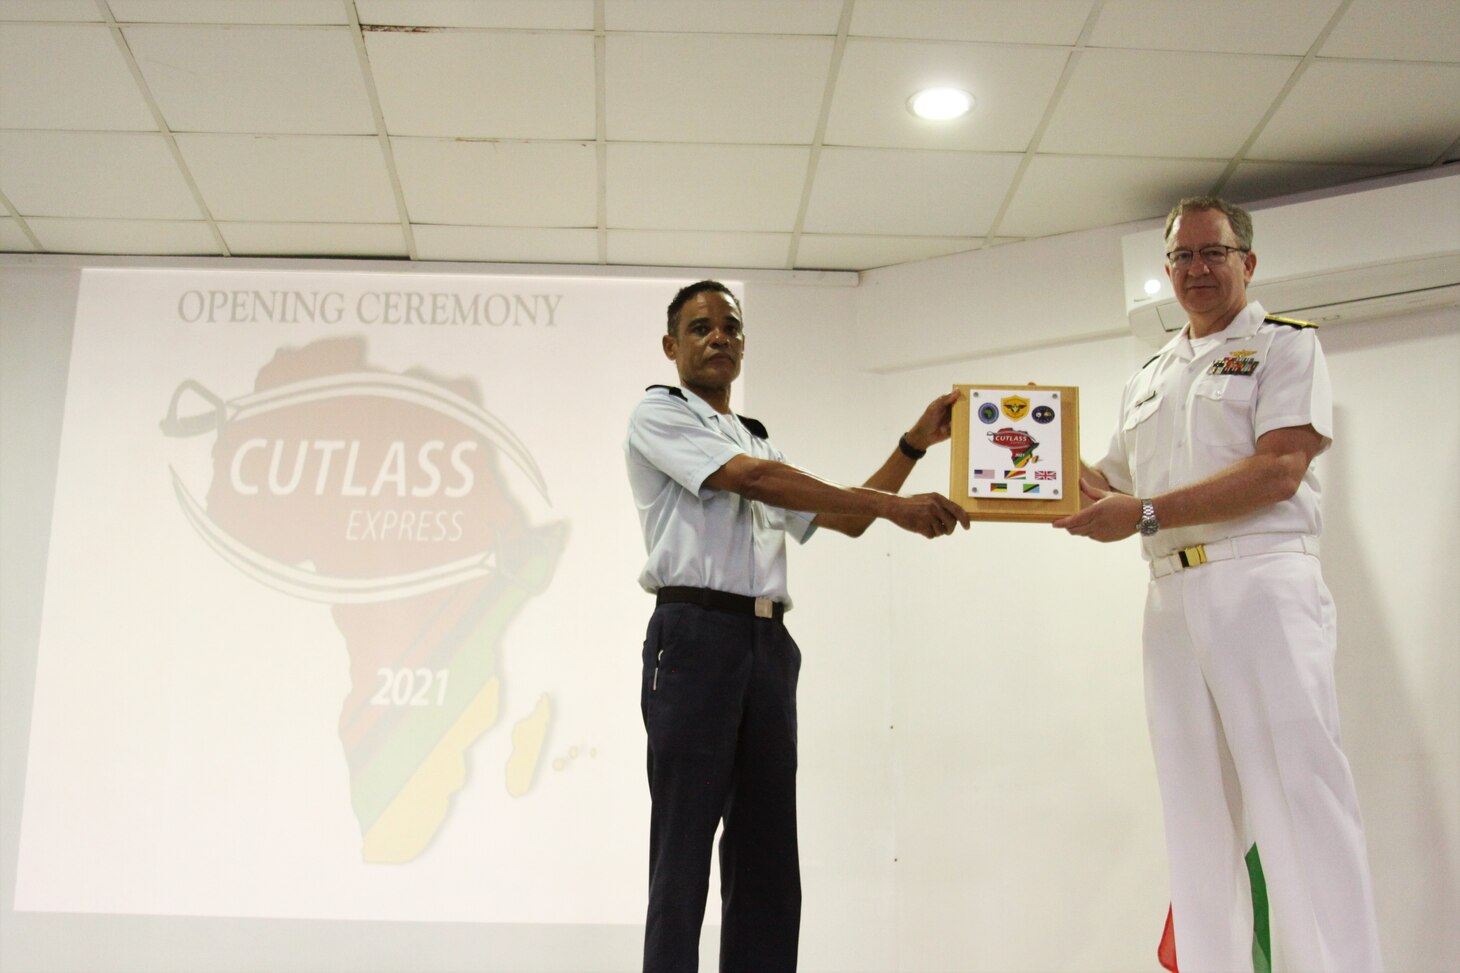 (July 26, 2021) Lt. Col. Jean Attala, Commander, Seychelles Coast Guard, left, exchanges gifts with Rear Adm. Jeffrey Spivey, Director, Maritime Partnership Program, U.S. Naval Force Europe-Africa, U.S. Sixth Fleet, during the opening ceremony of exercise Cutlass Express 2021 held at the Seychelles Coast Guard Academy in Victoria, Seychelles, July 26, 2021. Cutlass Express is designed to improve regional cooperation, maritime domain awareness and information sharing practices to increase capabilities between the U.S., East African and Western Indian Ocean nations to counter illicit maritime activity.